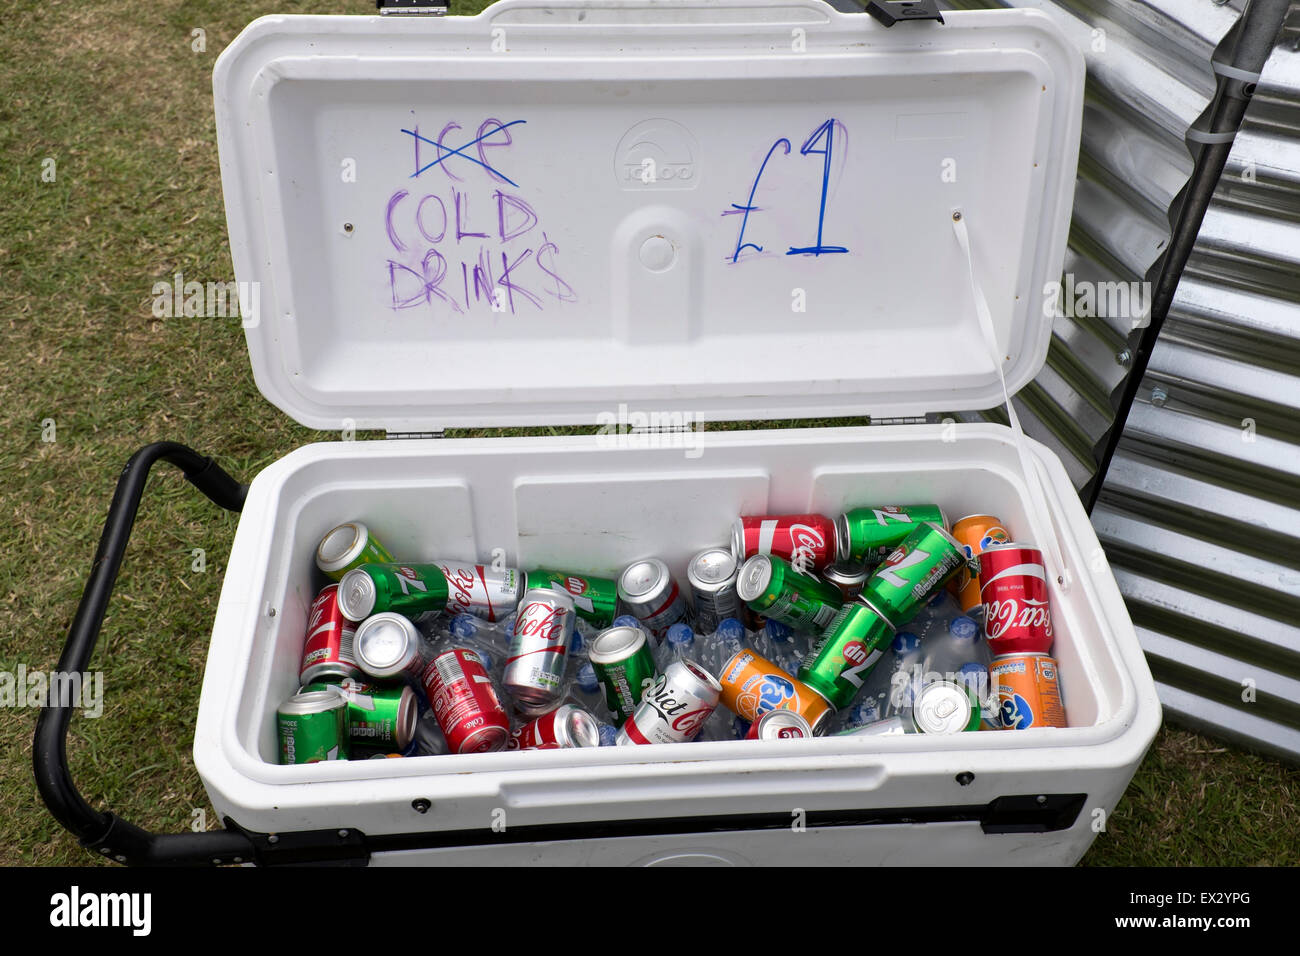 How To Pack A Cooler The Right Way To Pack A Cooler vlr.eng.br